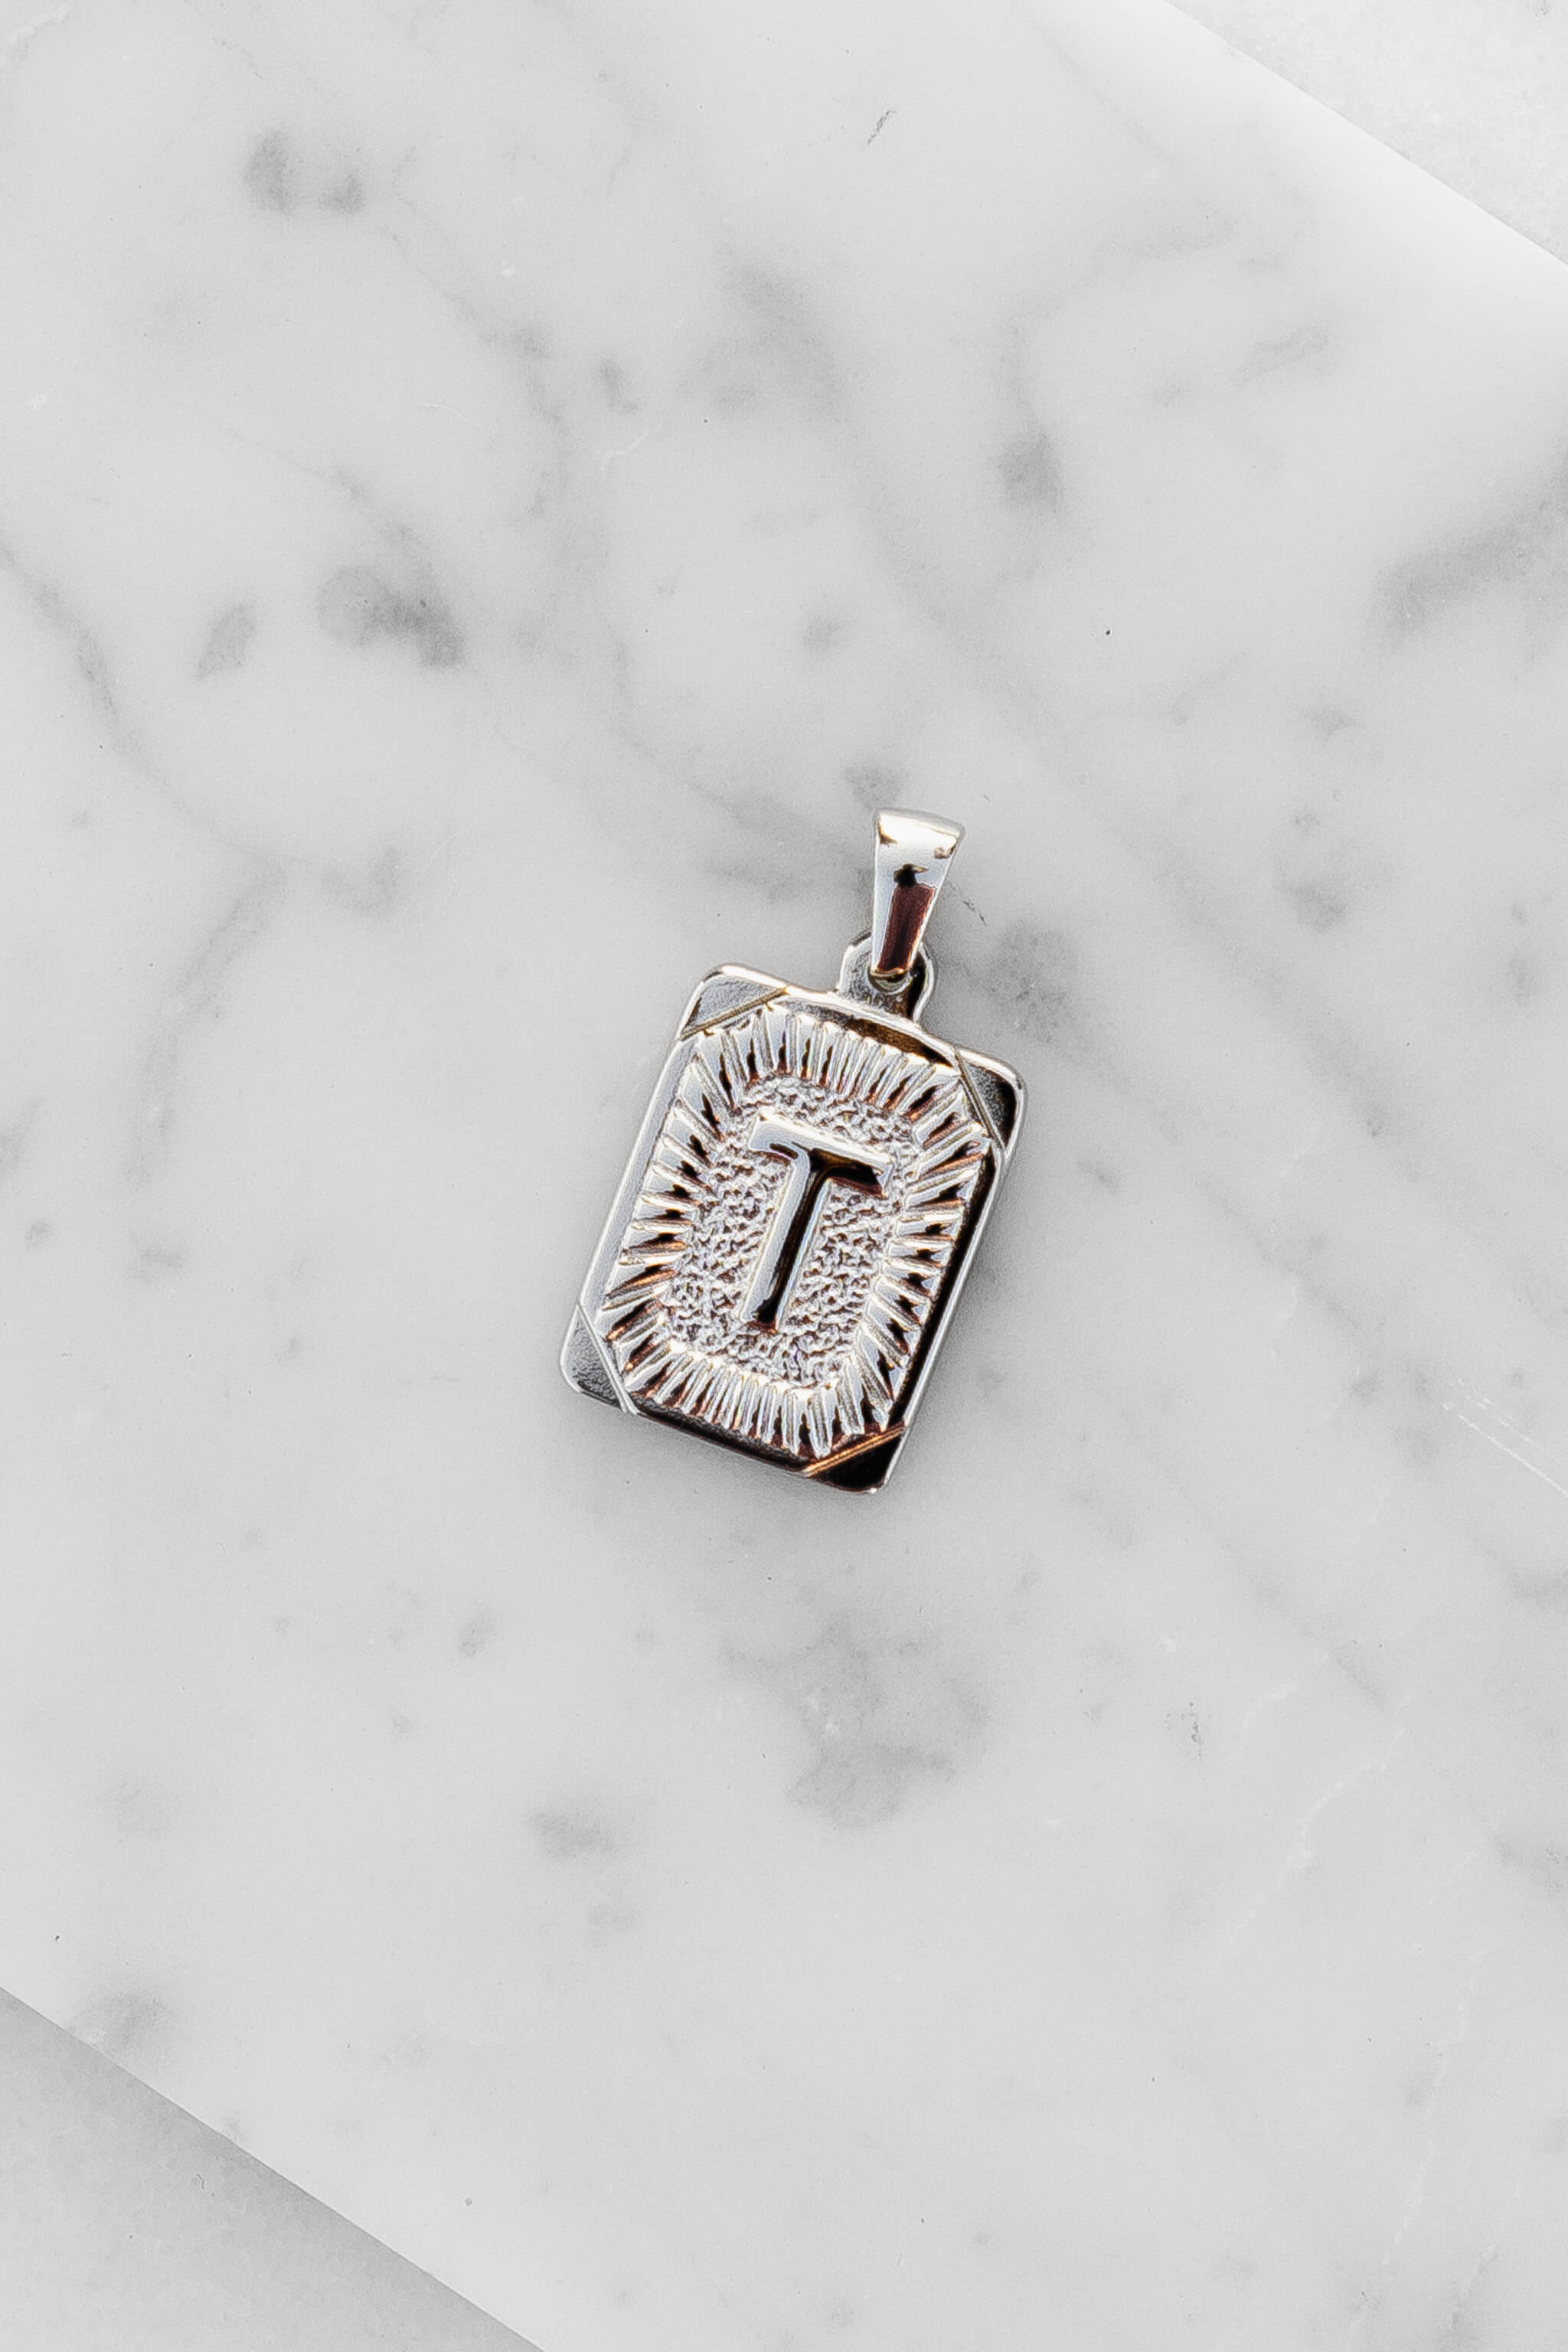 Silver Monogram Letter "T" Charm laying on a marble